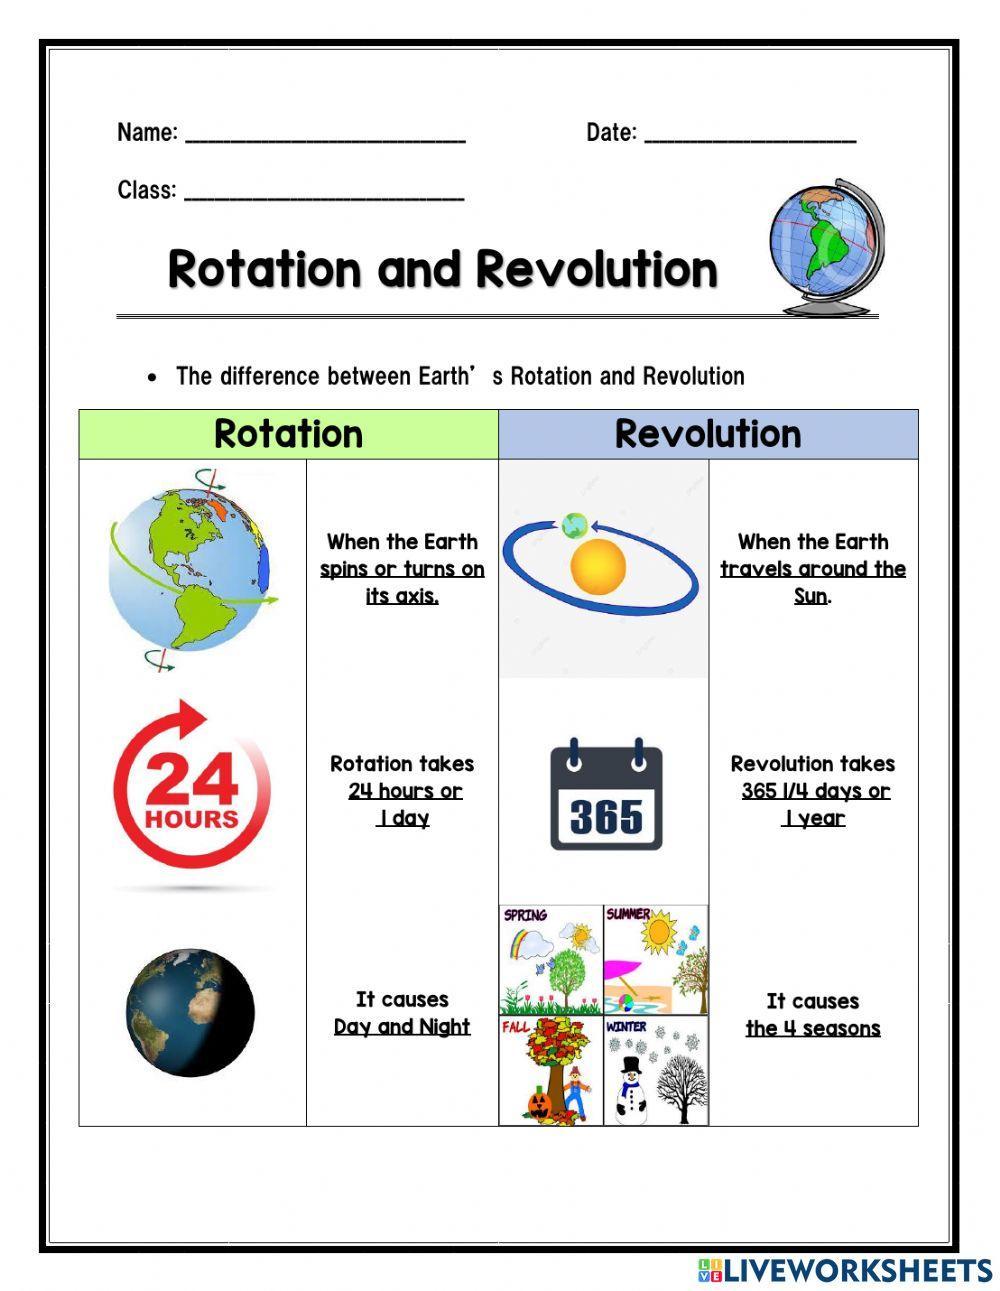 The difference between Earth's Rotation and Revolution